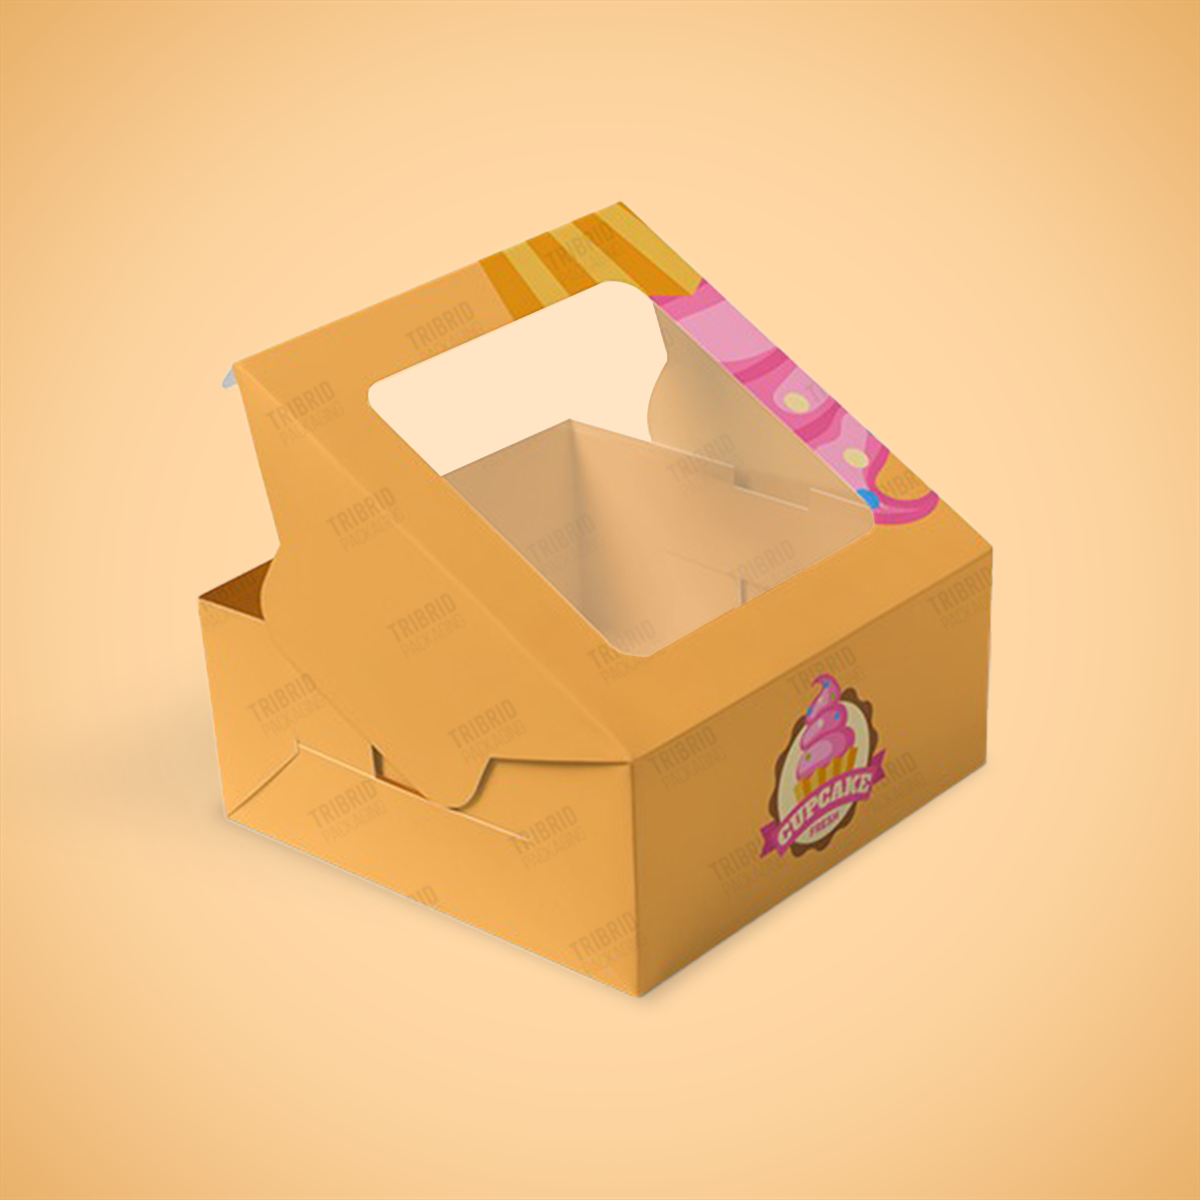 https://tribridpackaging.com/wp-content/uploads/2022/05/Bakery-boxes-main.png